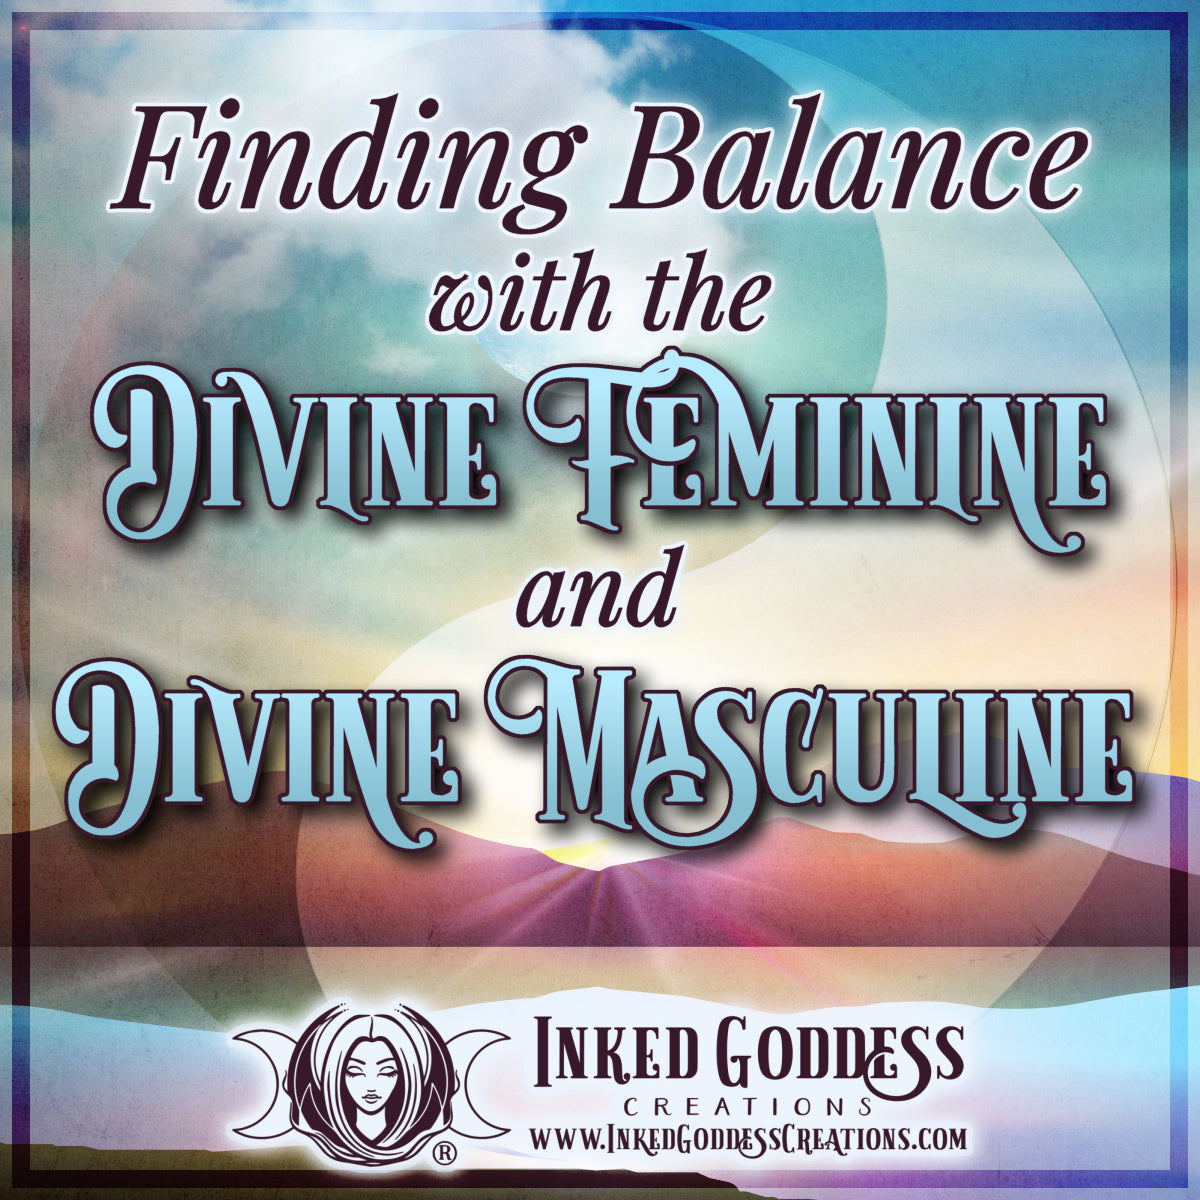 Finding Balance with the Divine Feminine and Divine Masculine